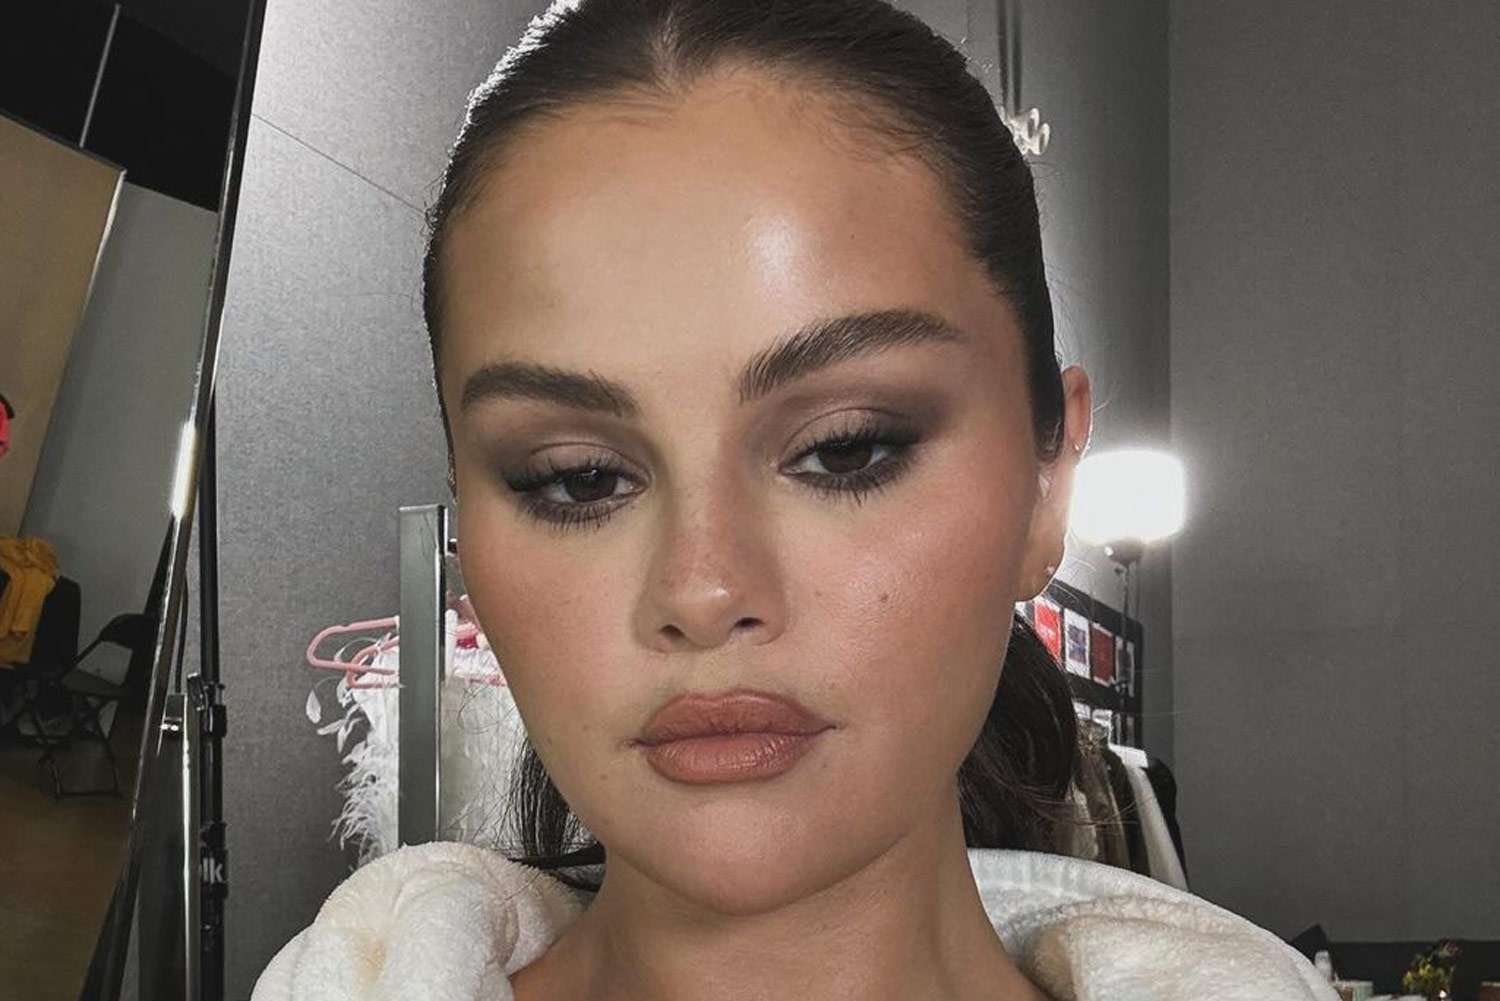 Selena Gomez Shares Series of Selfies with Different 'Faces, Phases'